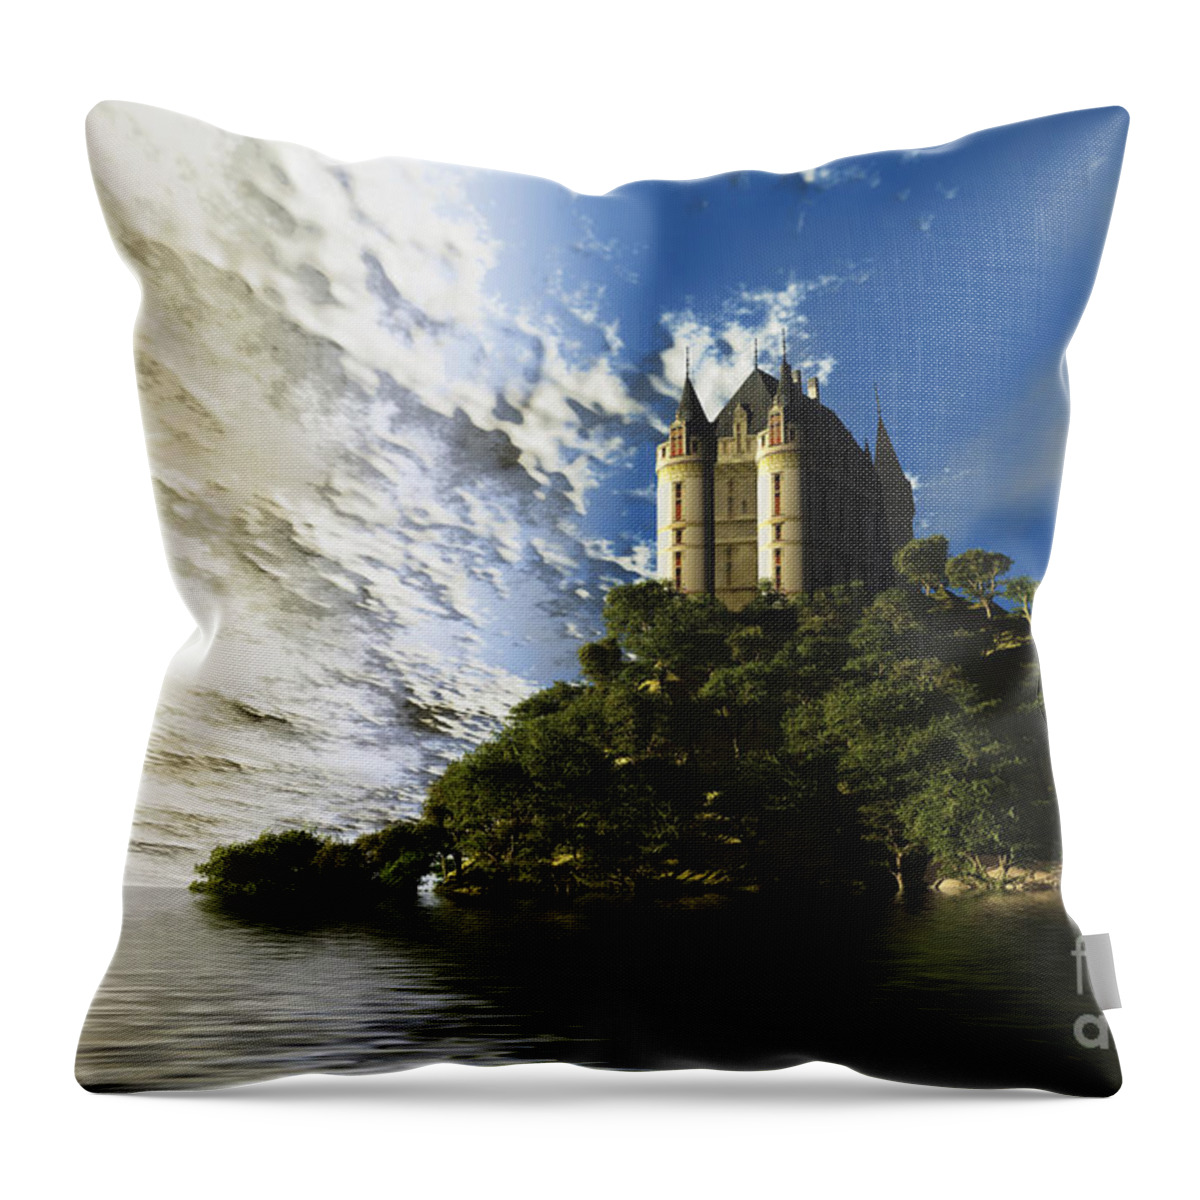 Ancient Throw Pillow featuring the painting Castle Retreat by Corey Ford